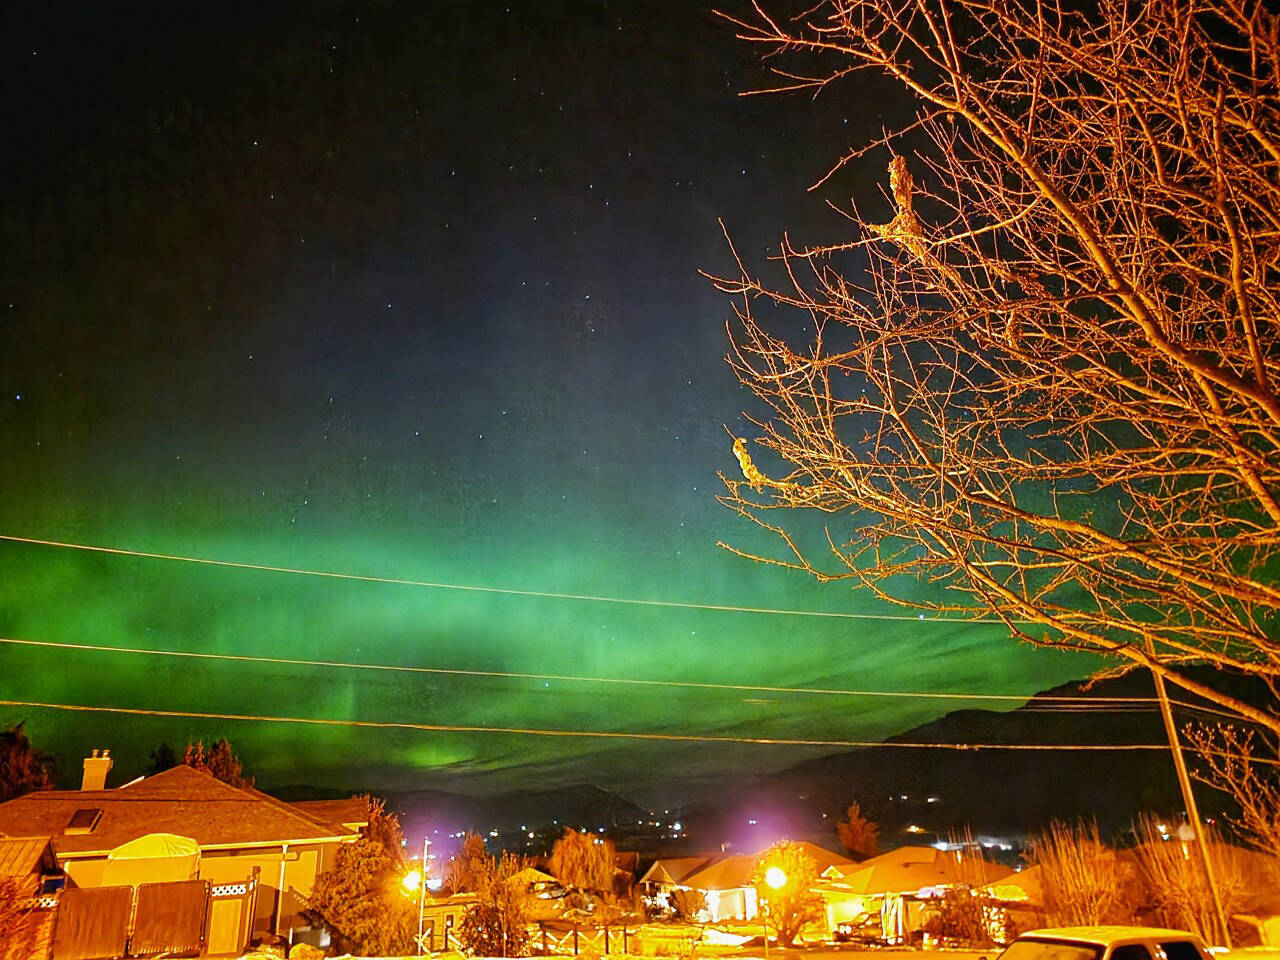 Northern Lights are captured over Enderby Feb. 14. (Laura Madhok photo)